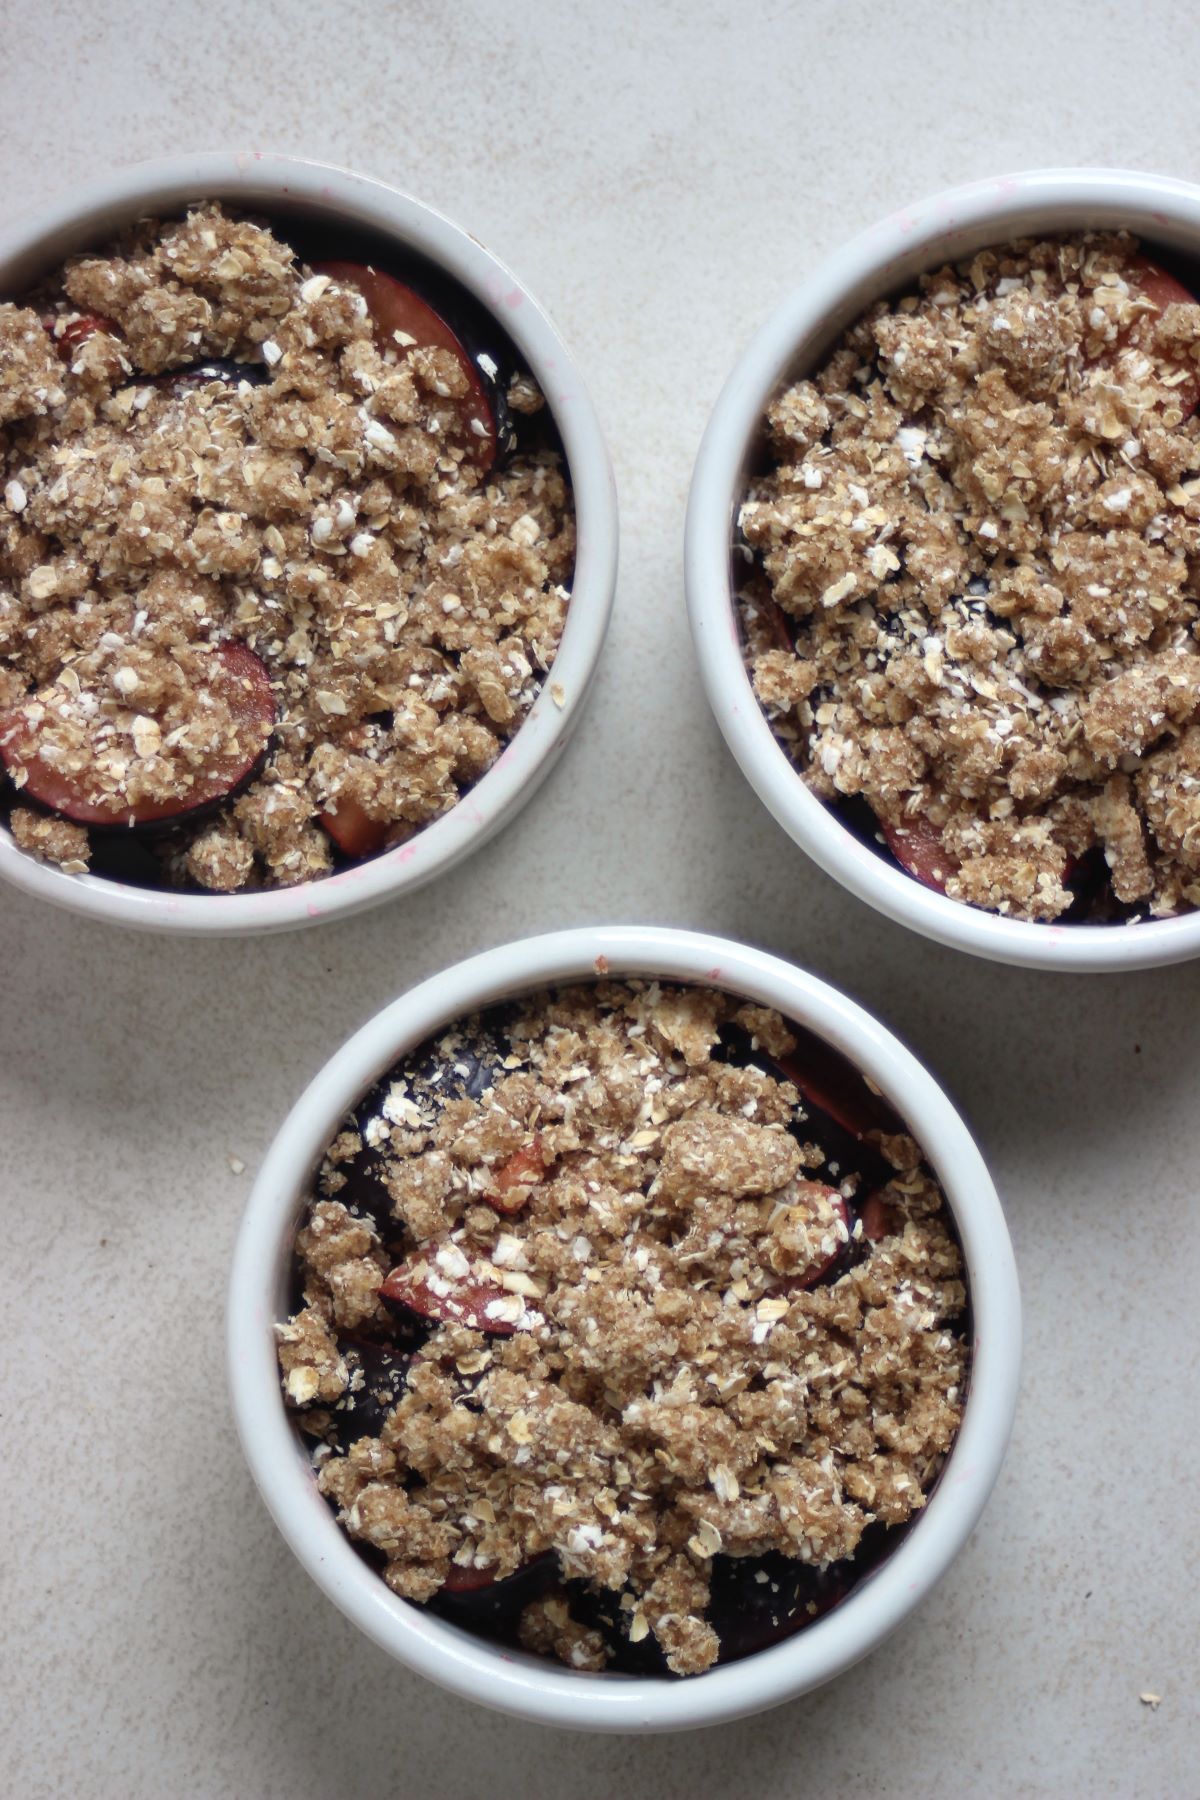 Three ramekins with plum crisp before bake on a white surface seen from above.